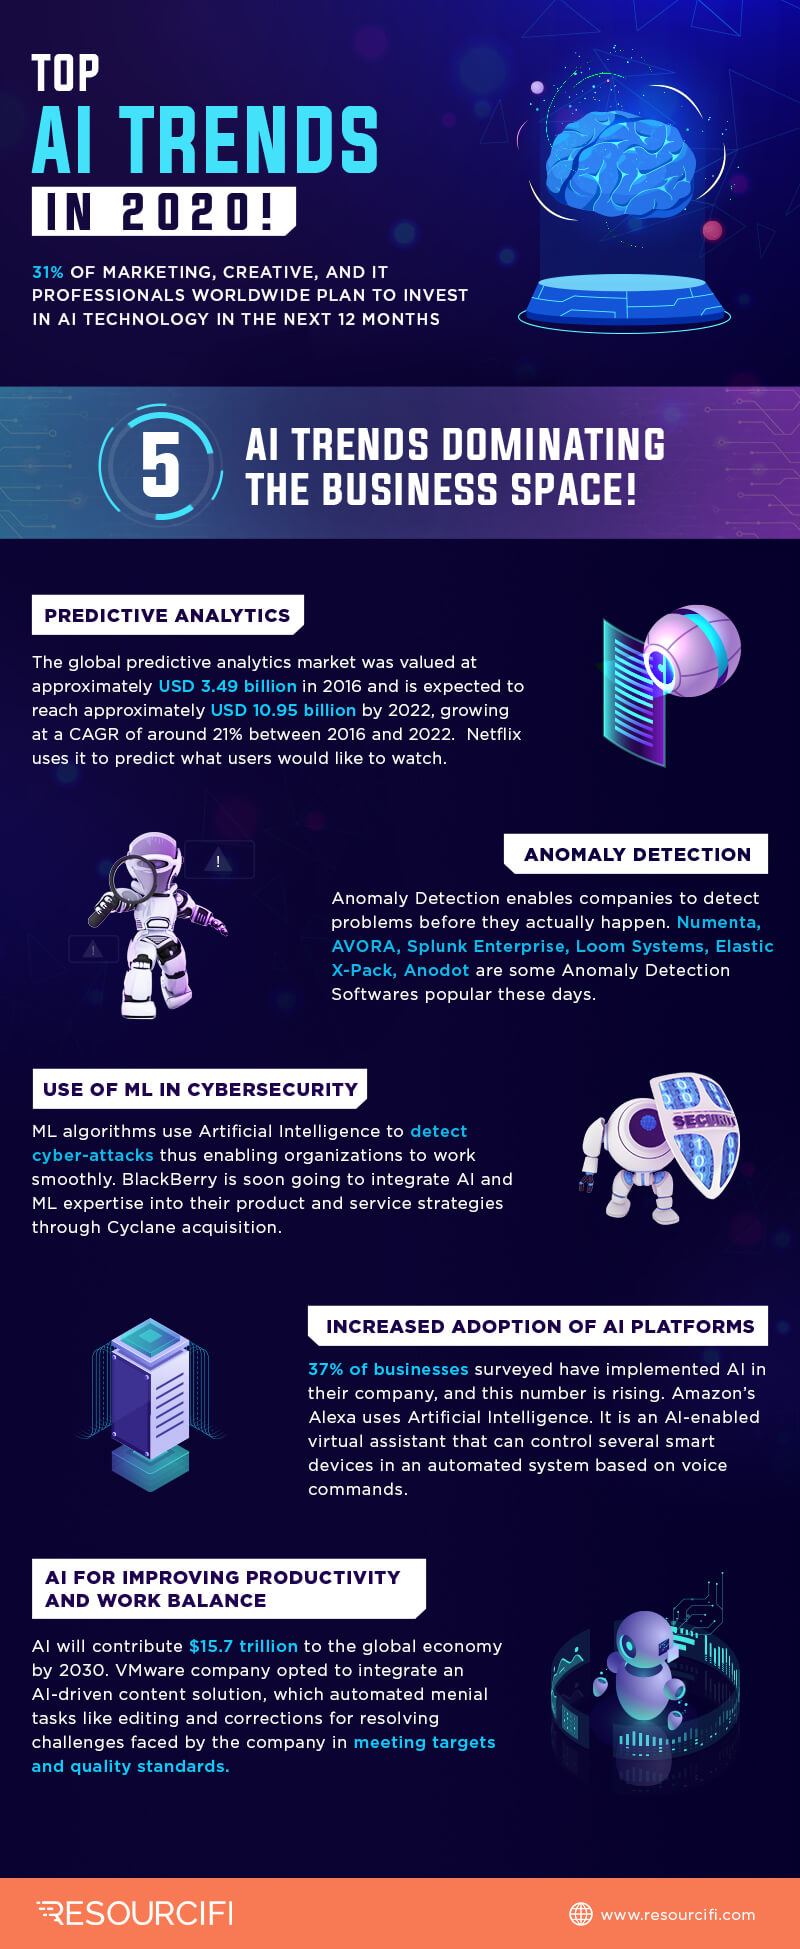 Artificial Intelligence Trends